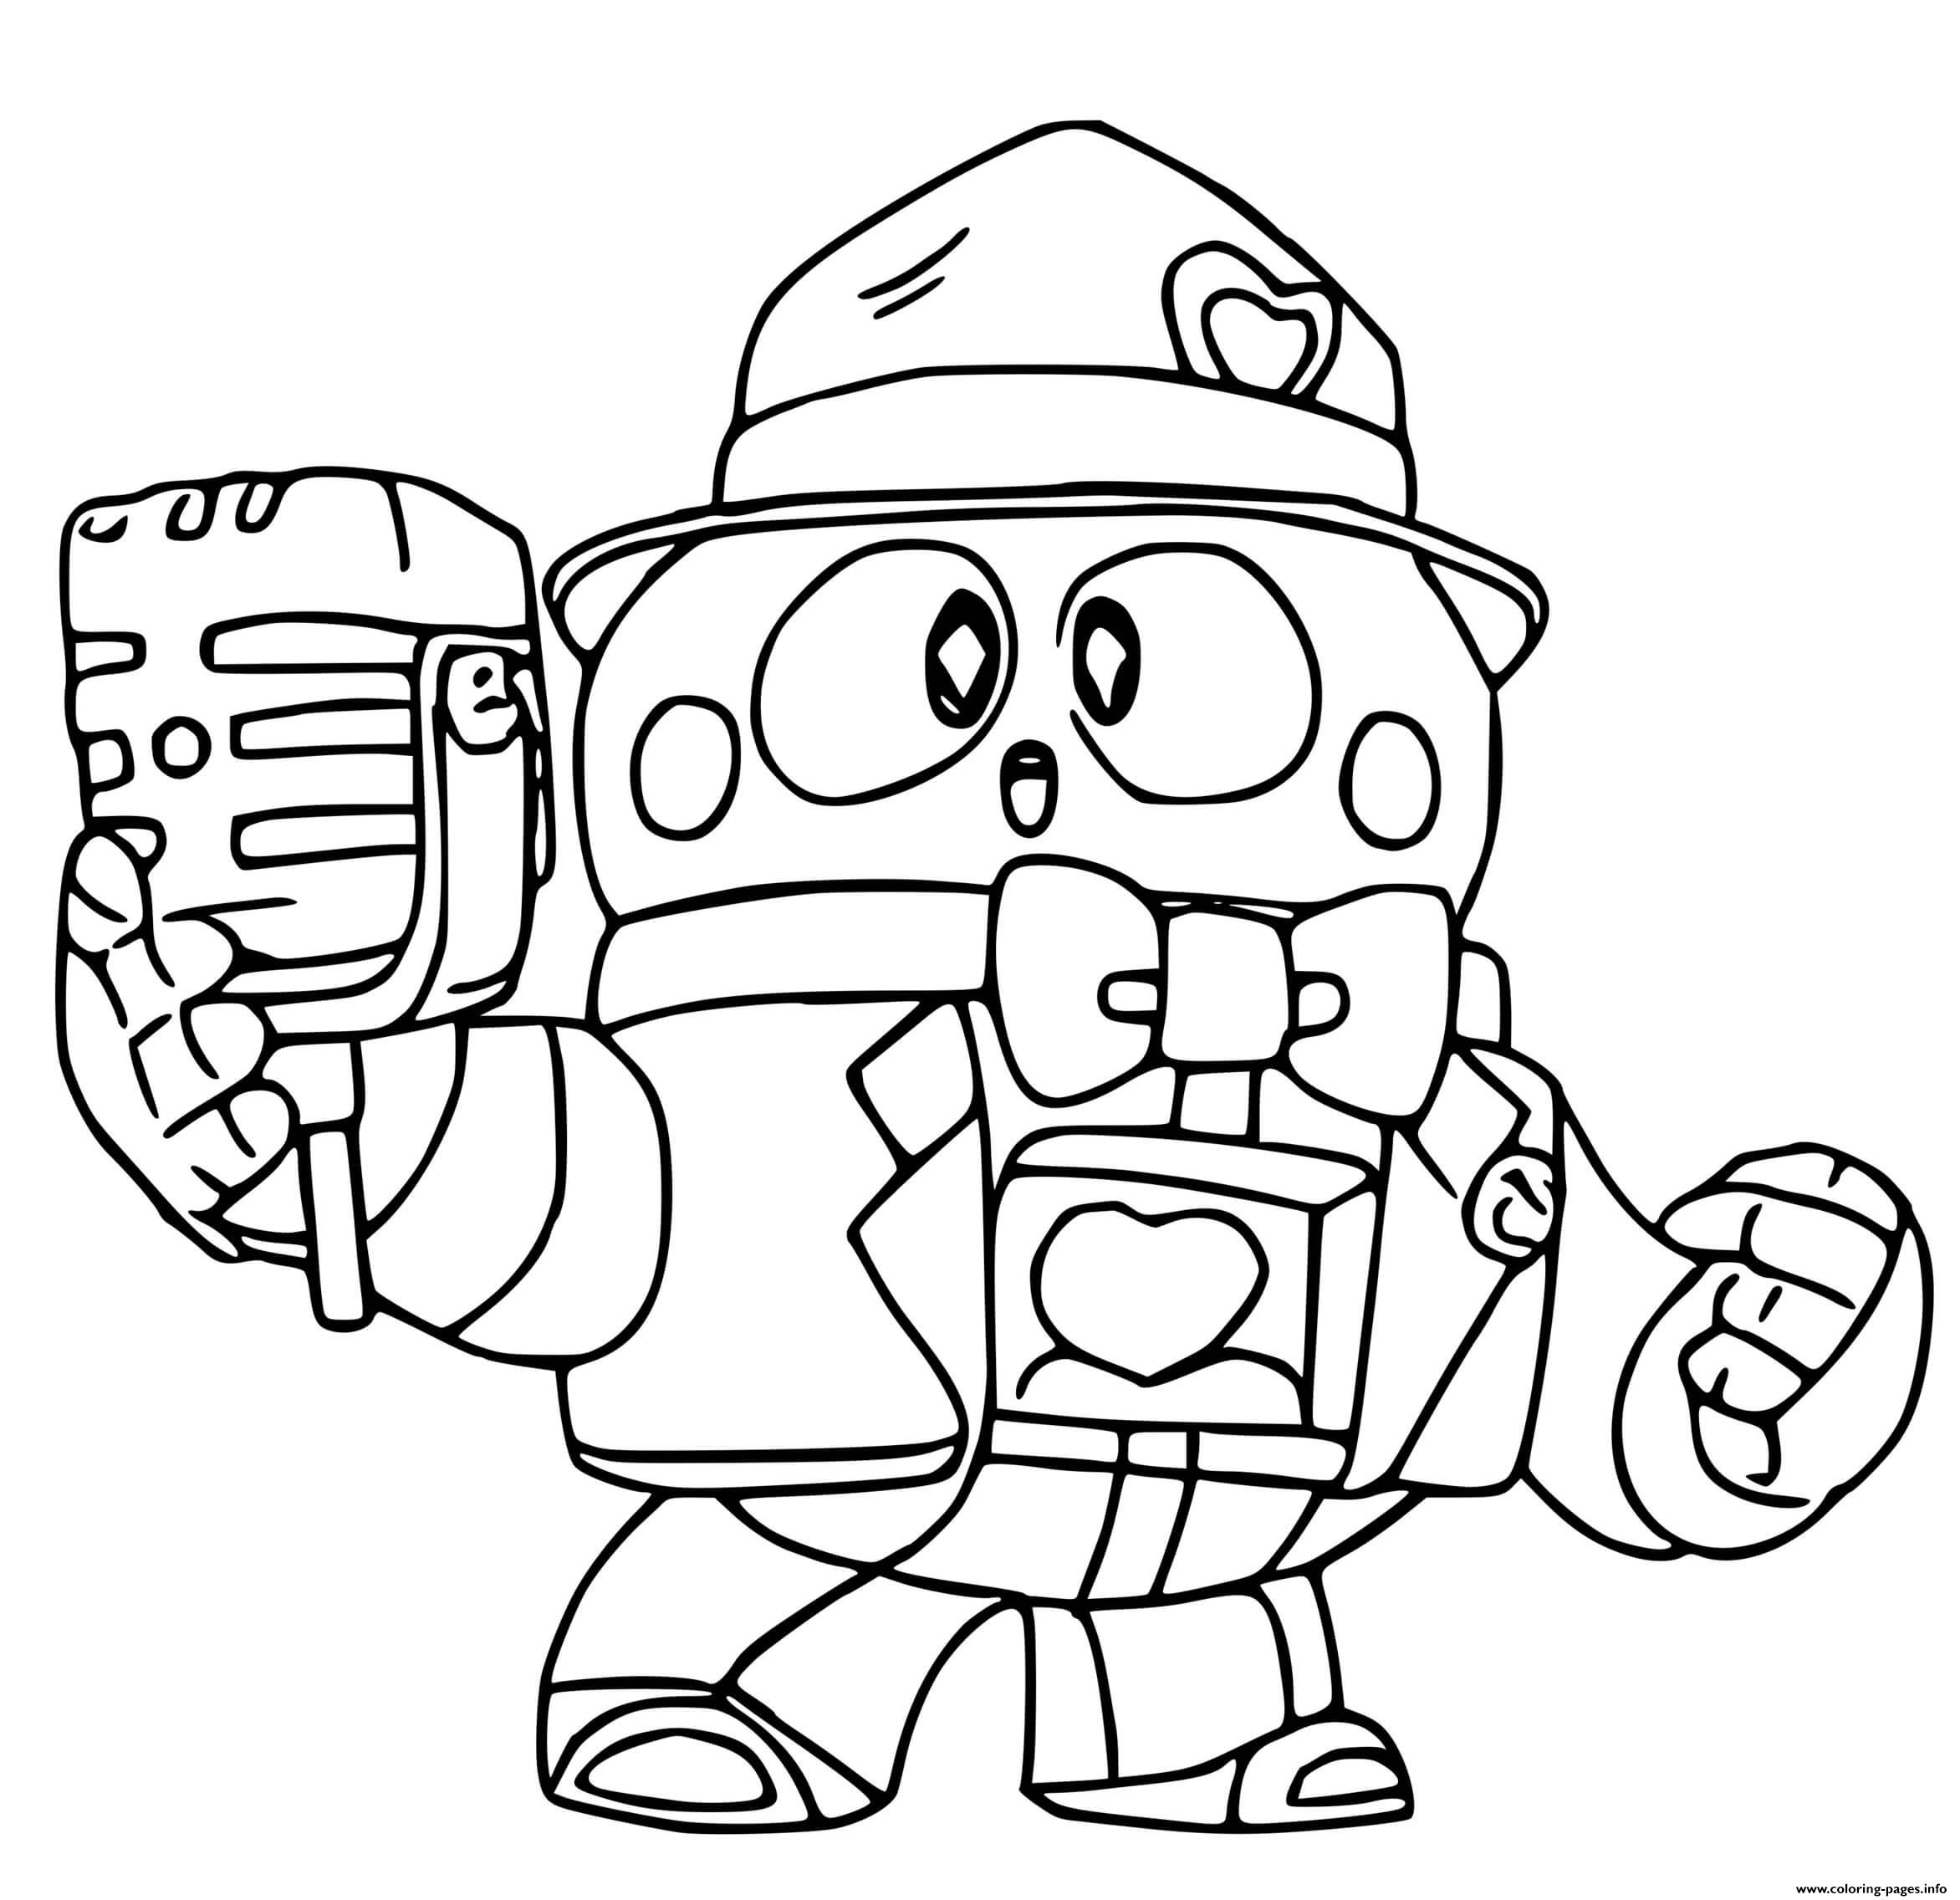 Brawl Stars Force Starr Lou Le Doux Coloring Pages Printable - brawl stars coloring page